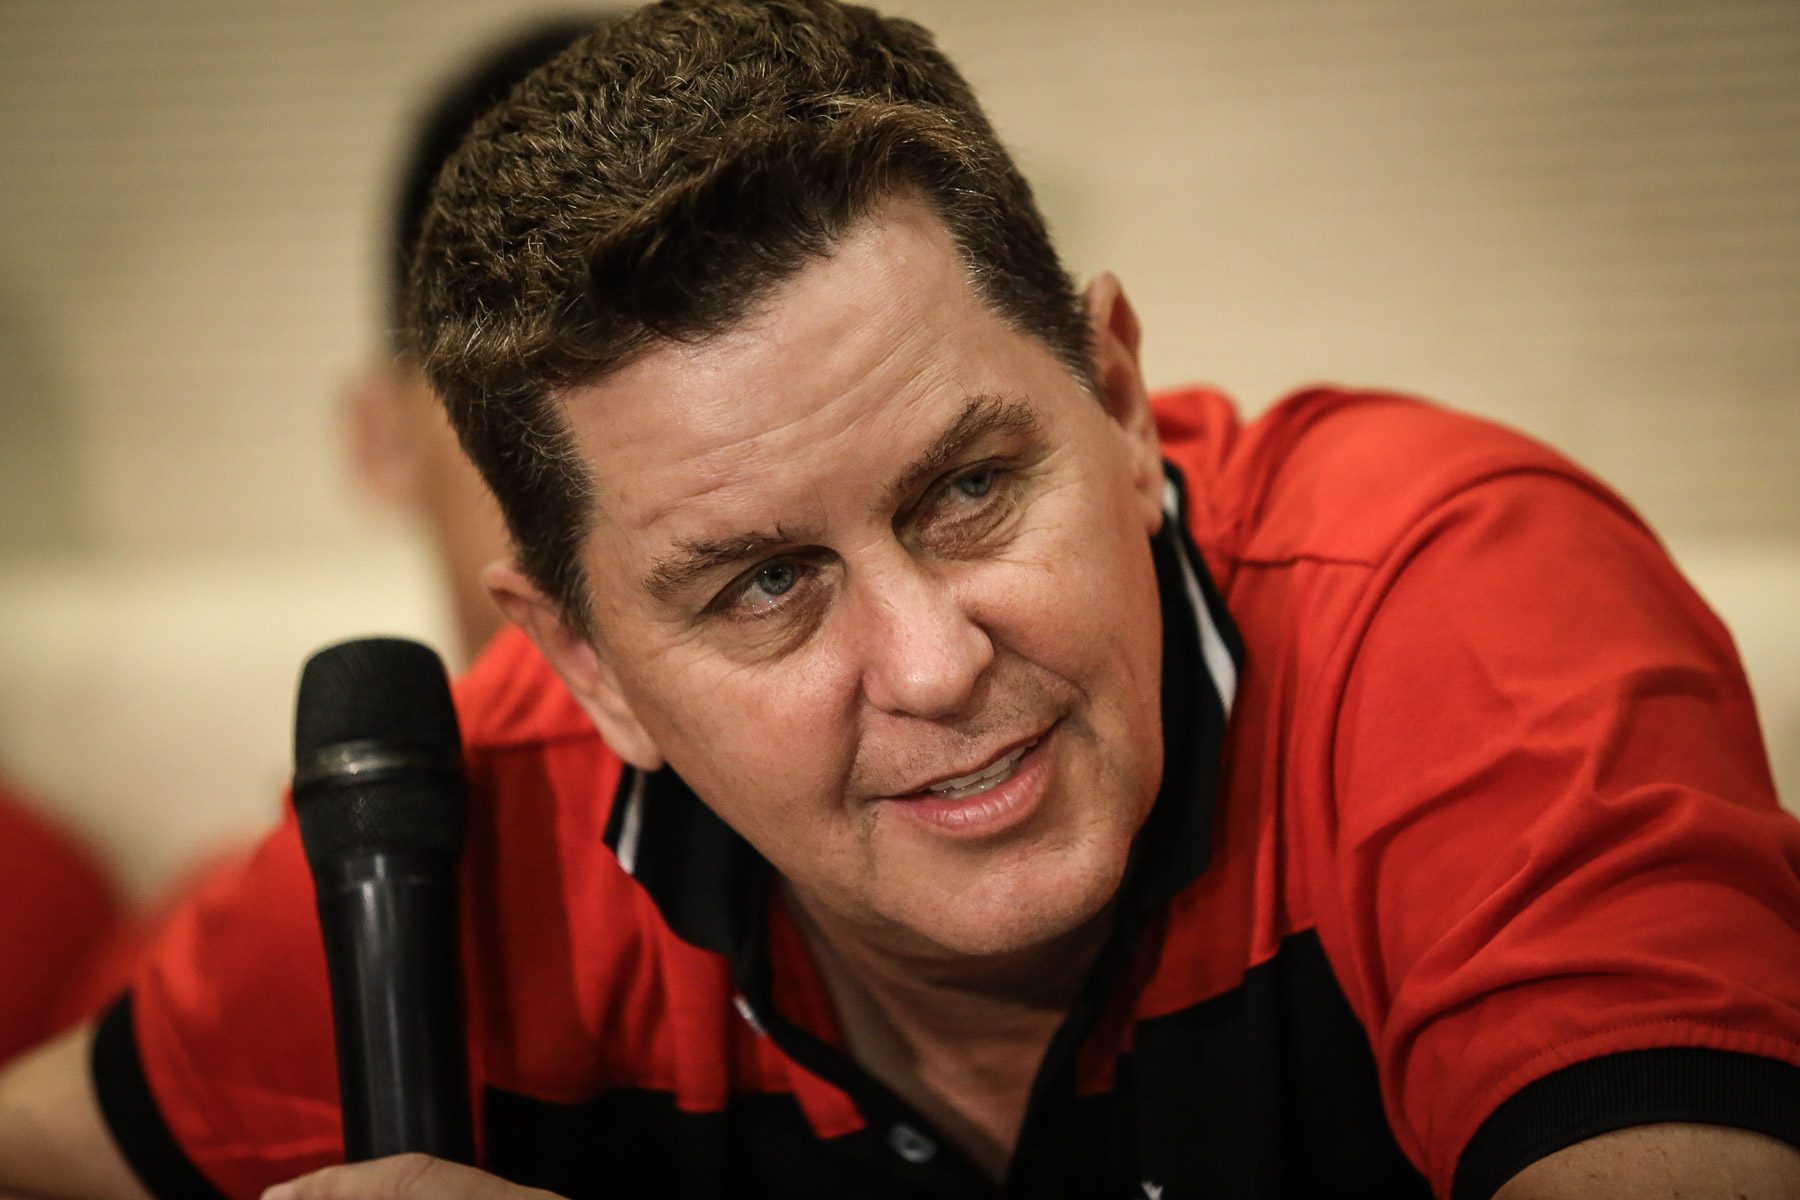 Jordan book author says Phil Jackson should hire Tim Cone for Knicks